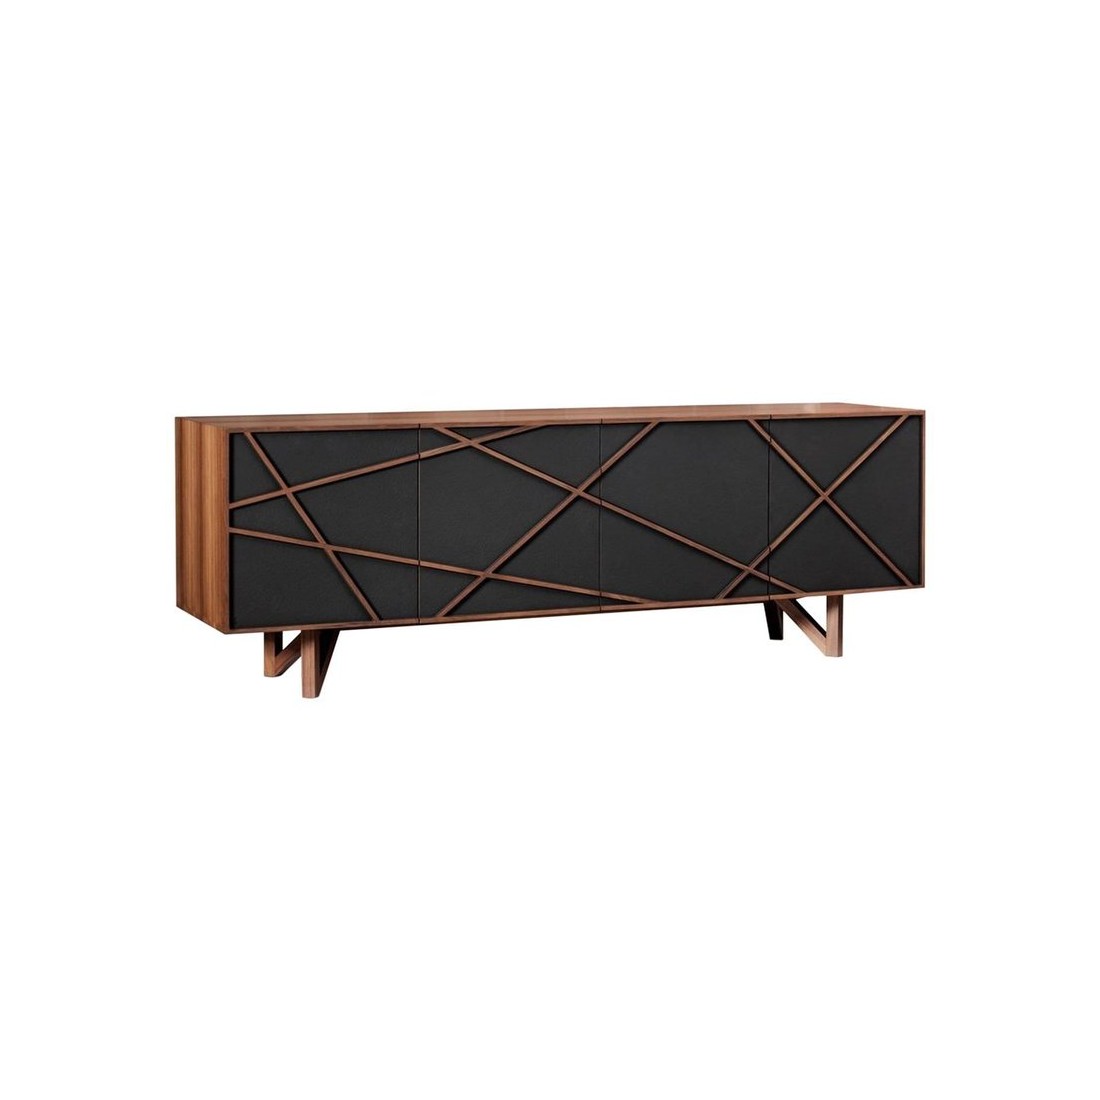 Буфет Brave Sideboard by Macronato & Zappa Arch, Lacquered Wooden Sideboard